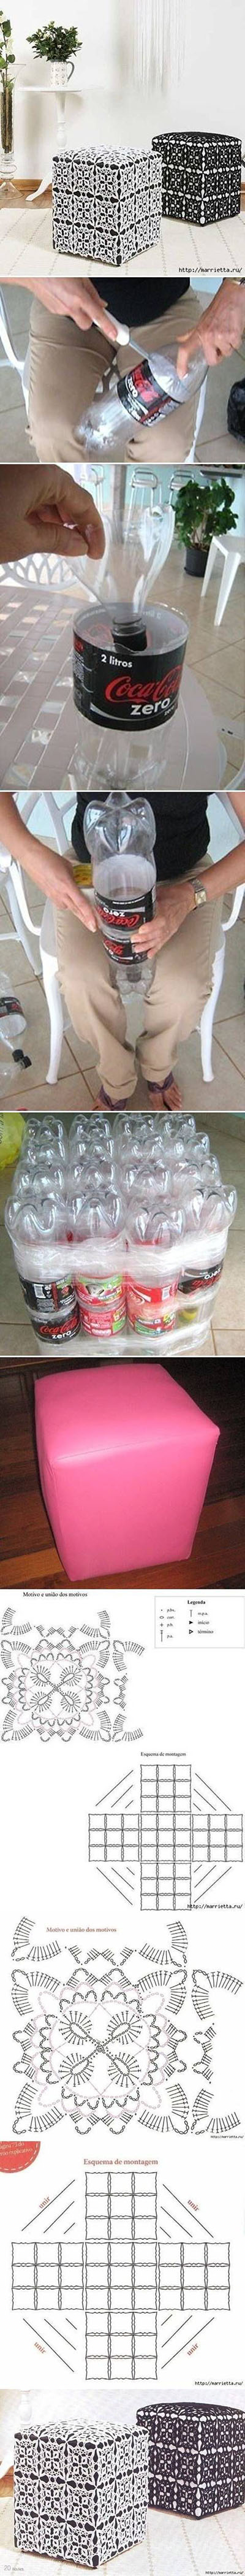 2  DIY Ottoman Out of Plastic Bottles99b5